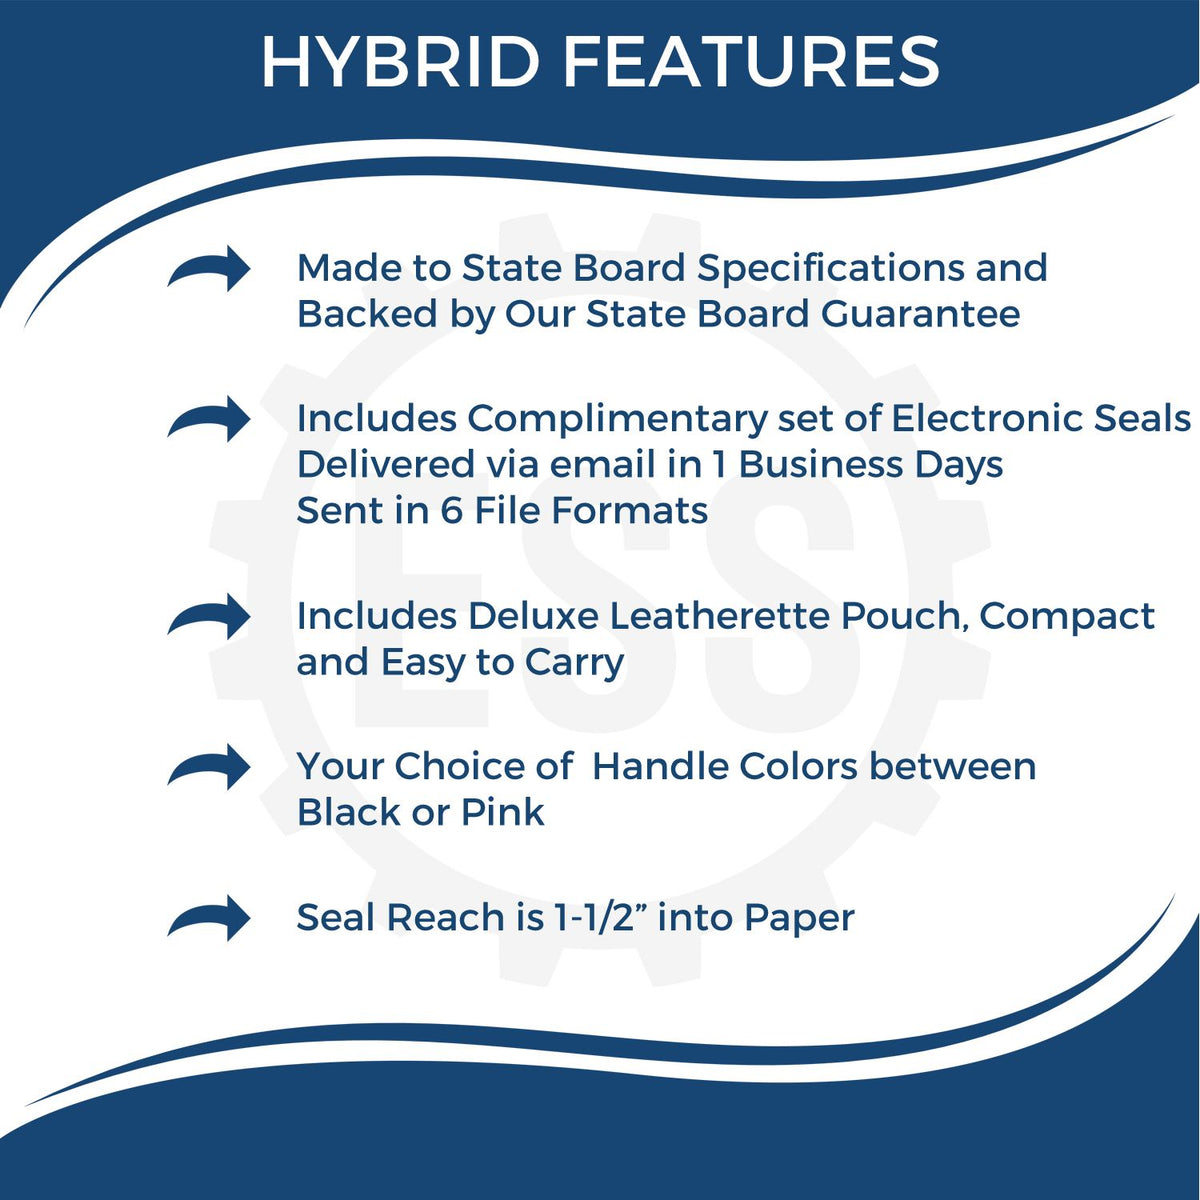 A picture of an infographic highlighting the selling points for the Hybrid New Hampshire Architect Seal